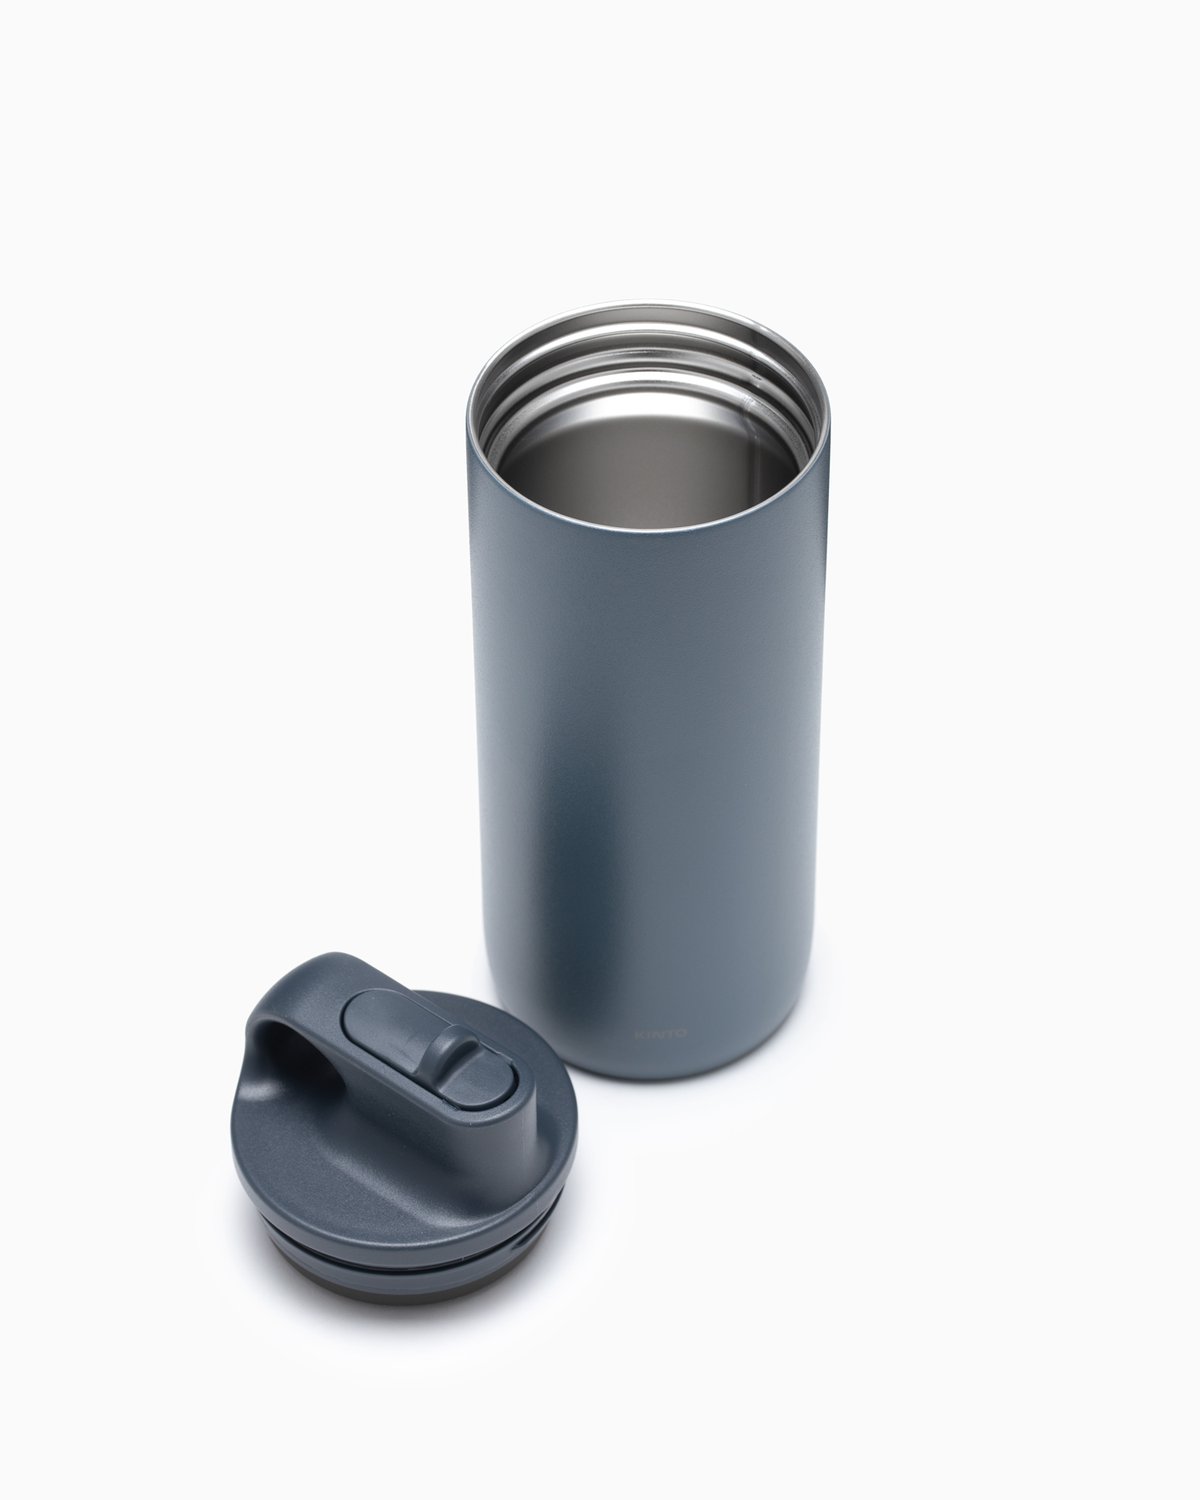 Kinto Active Tumbler 600ml/800ml Lid in Blue Gray